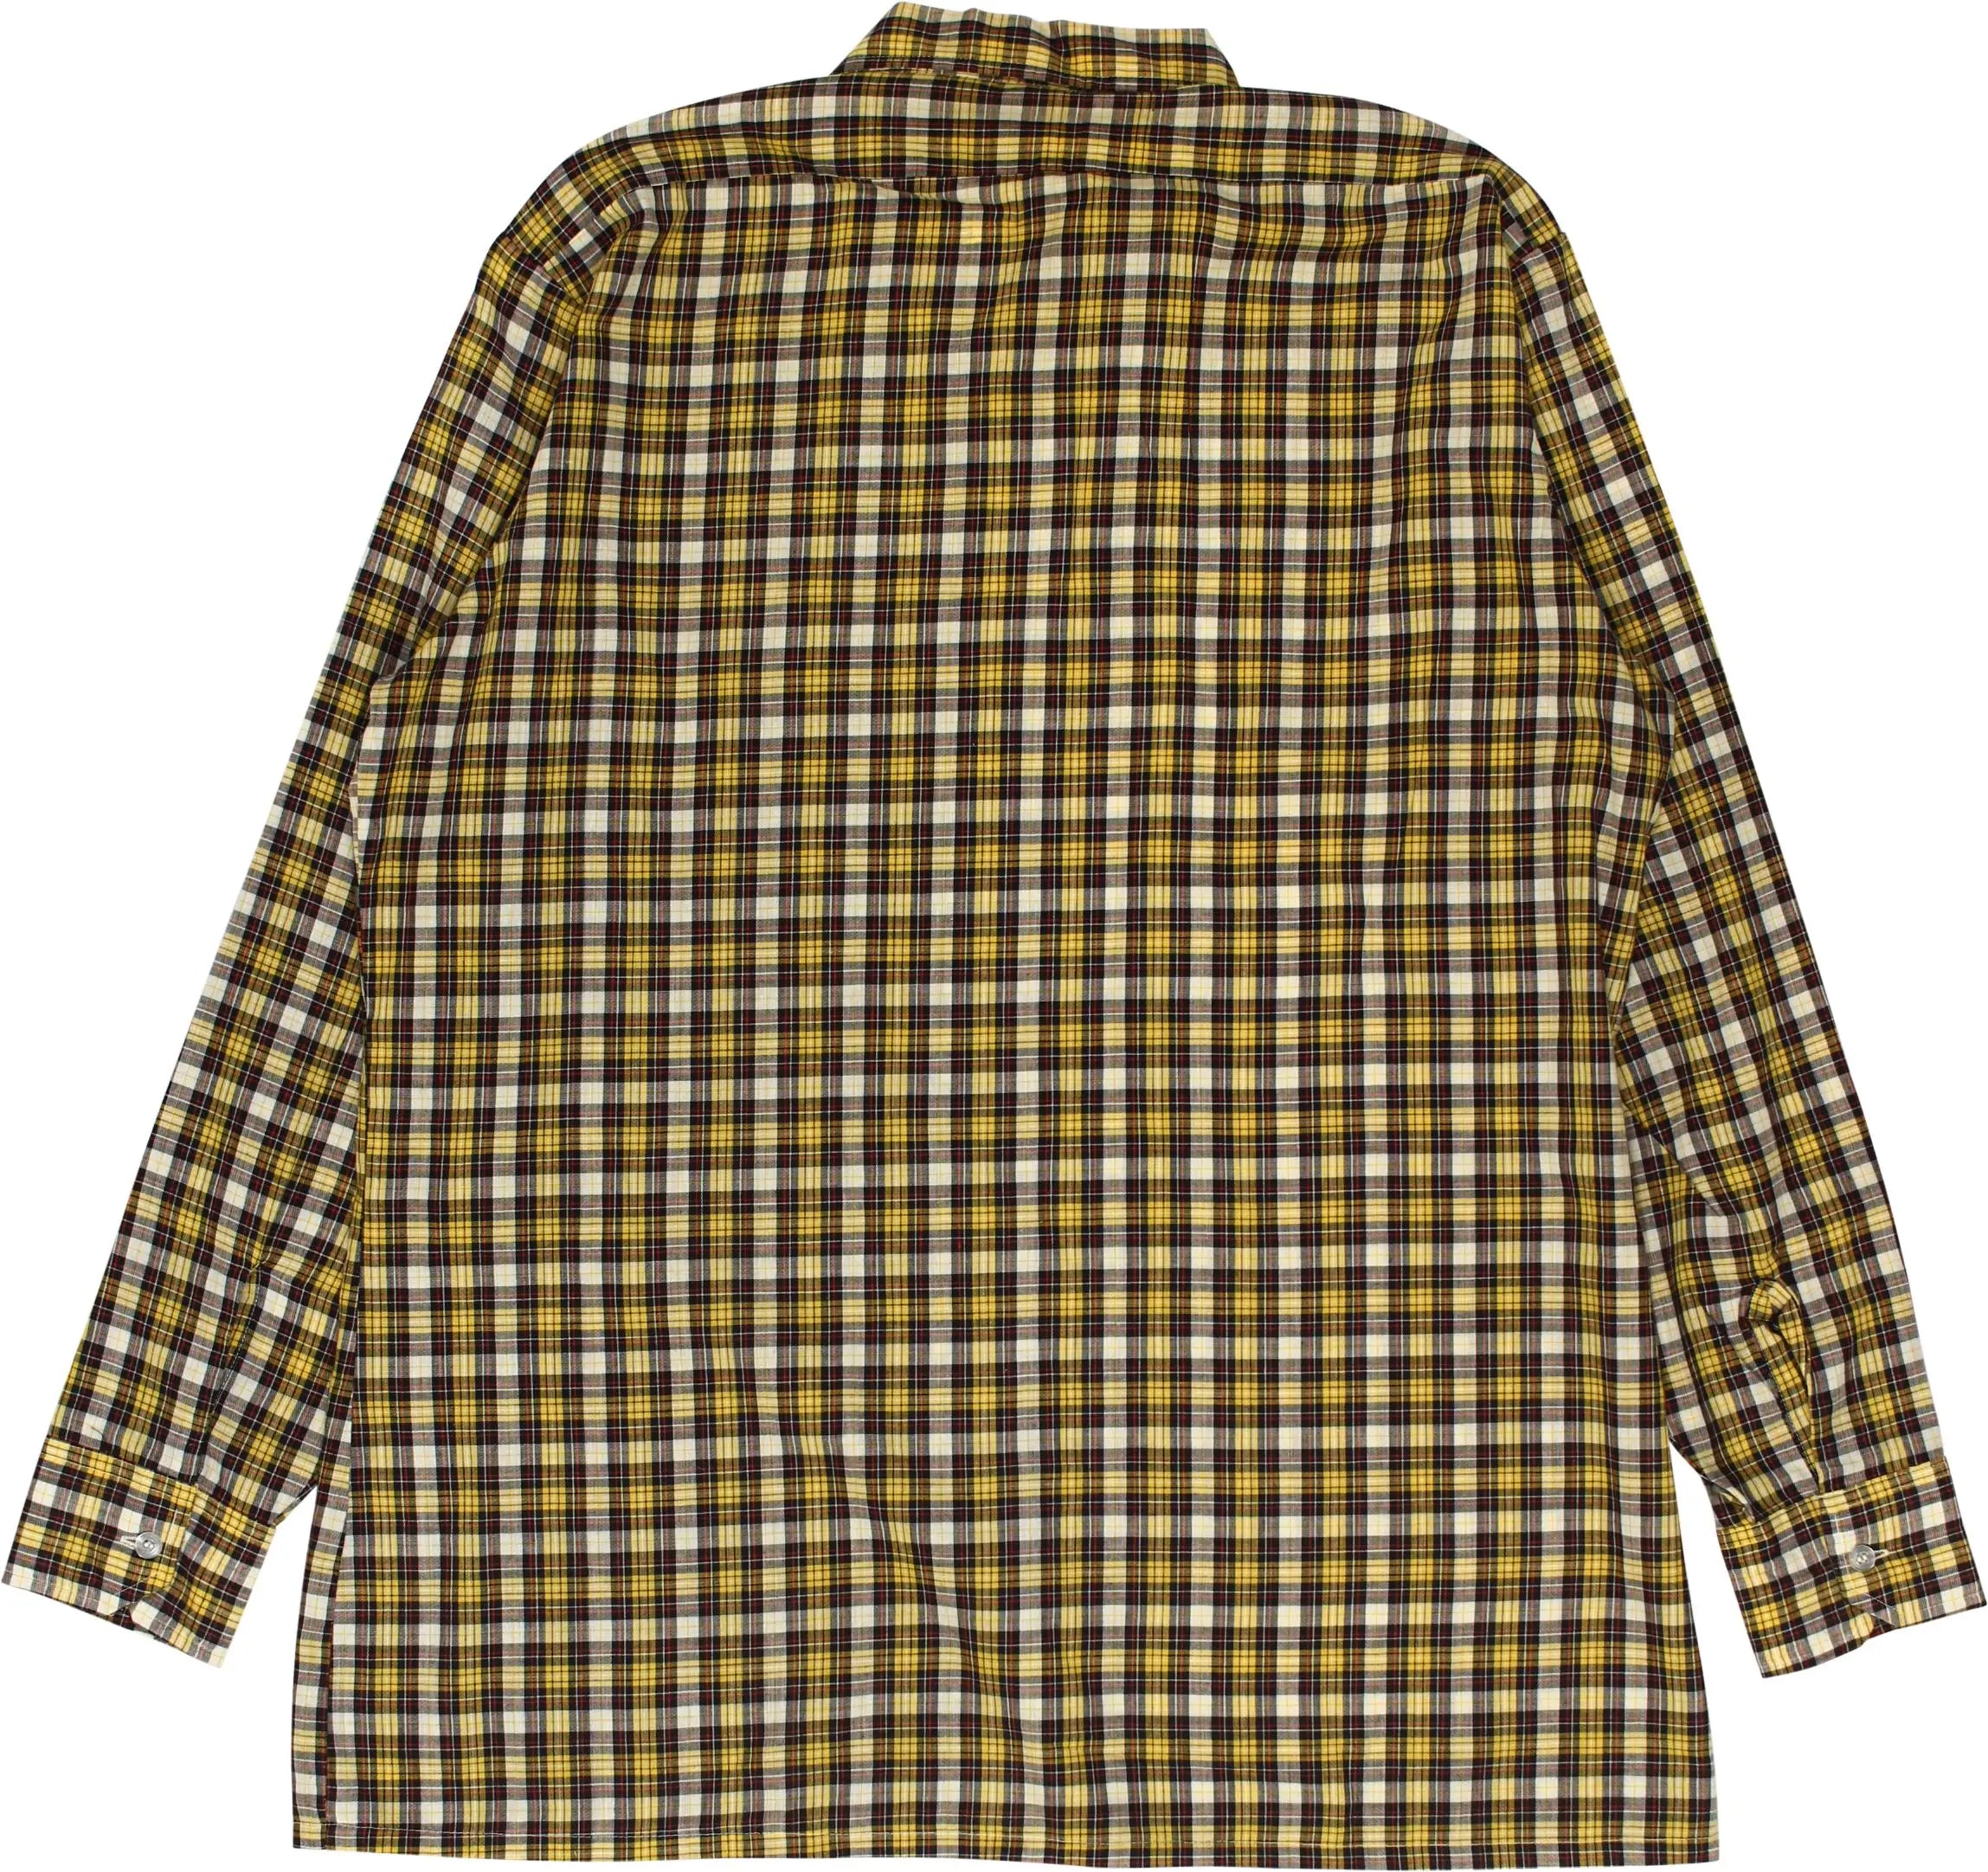 Mode 2000 - 70s Checkered Shirt- ThriftTale.com - Vintage and second handclothing